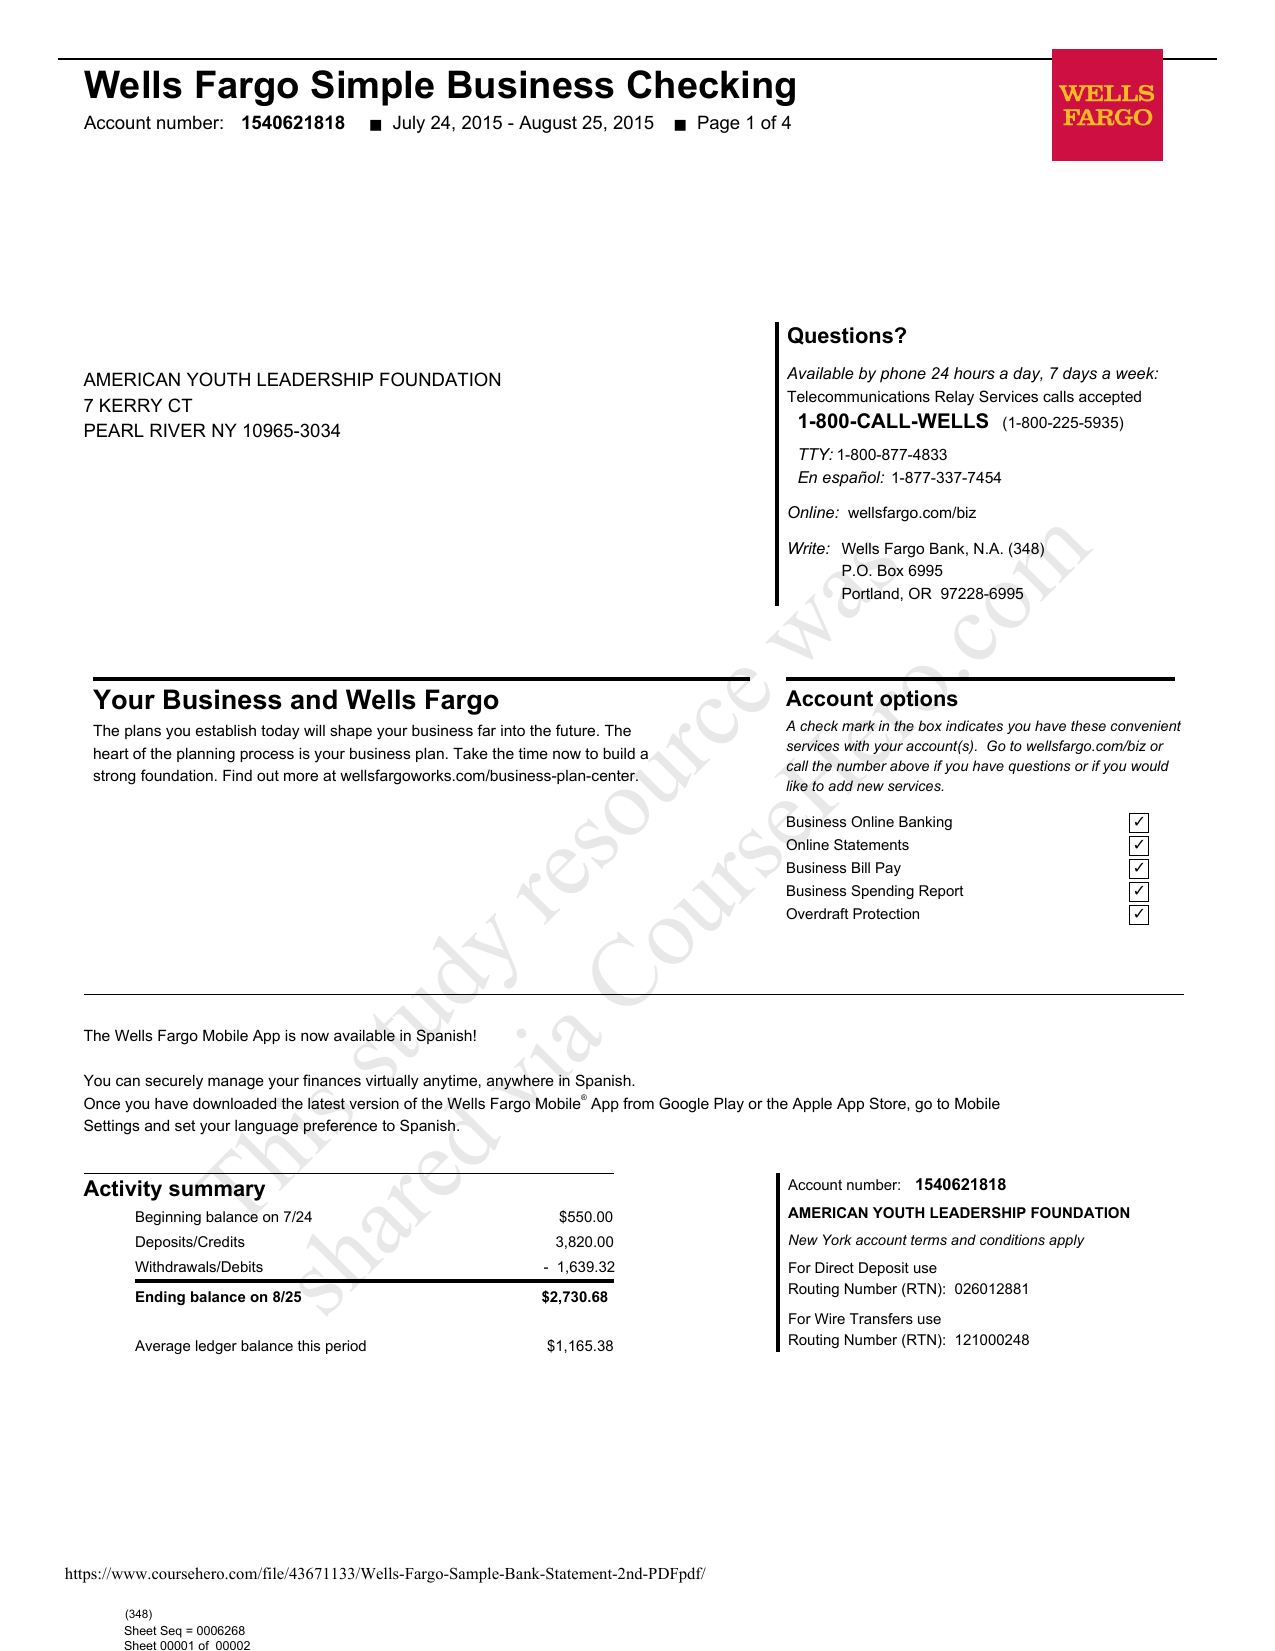 Wells Fargo Bank Statement Template Opportunity Checking sites.unimi.it